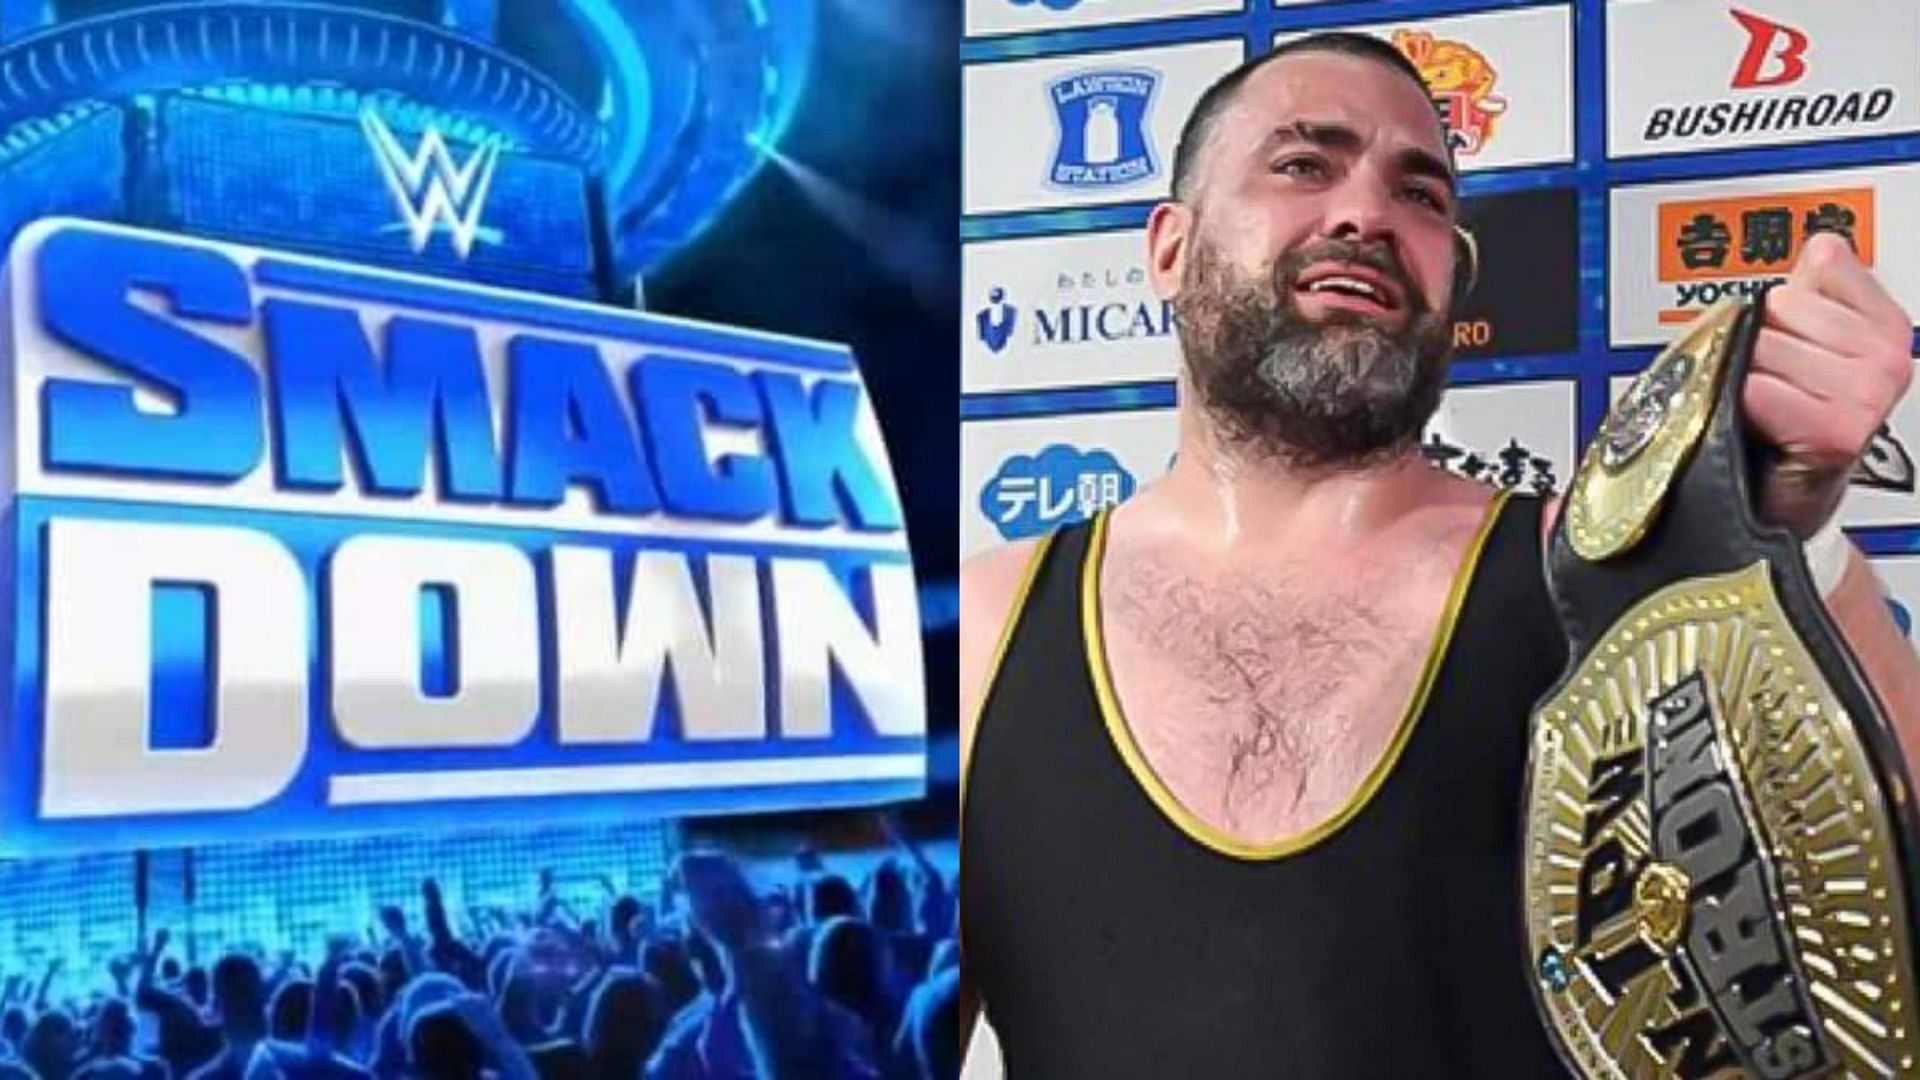 Eddie Kingston recently won the NJPW Strong Openweight title.